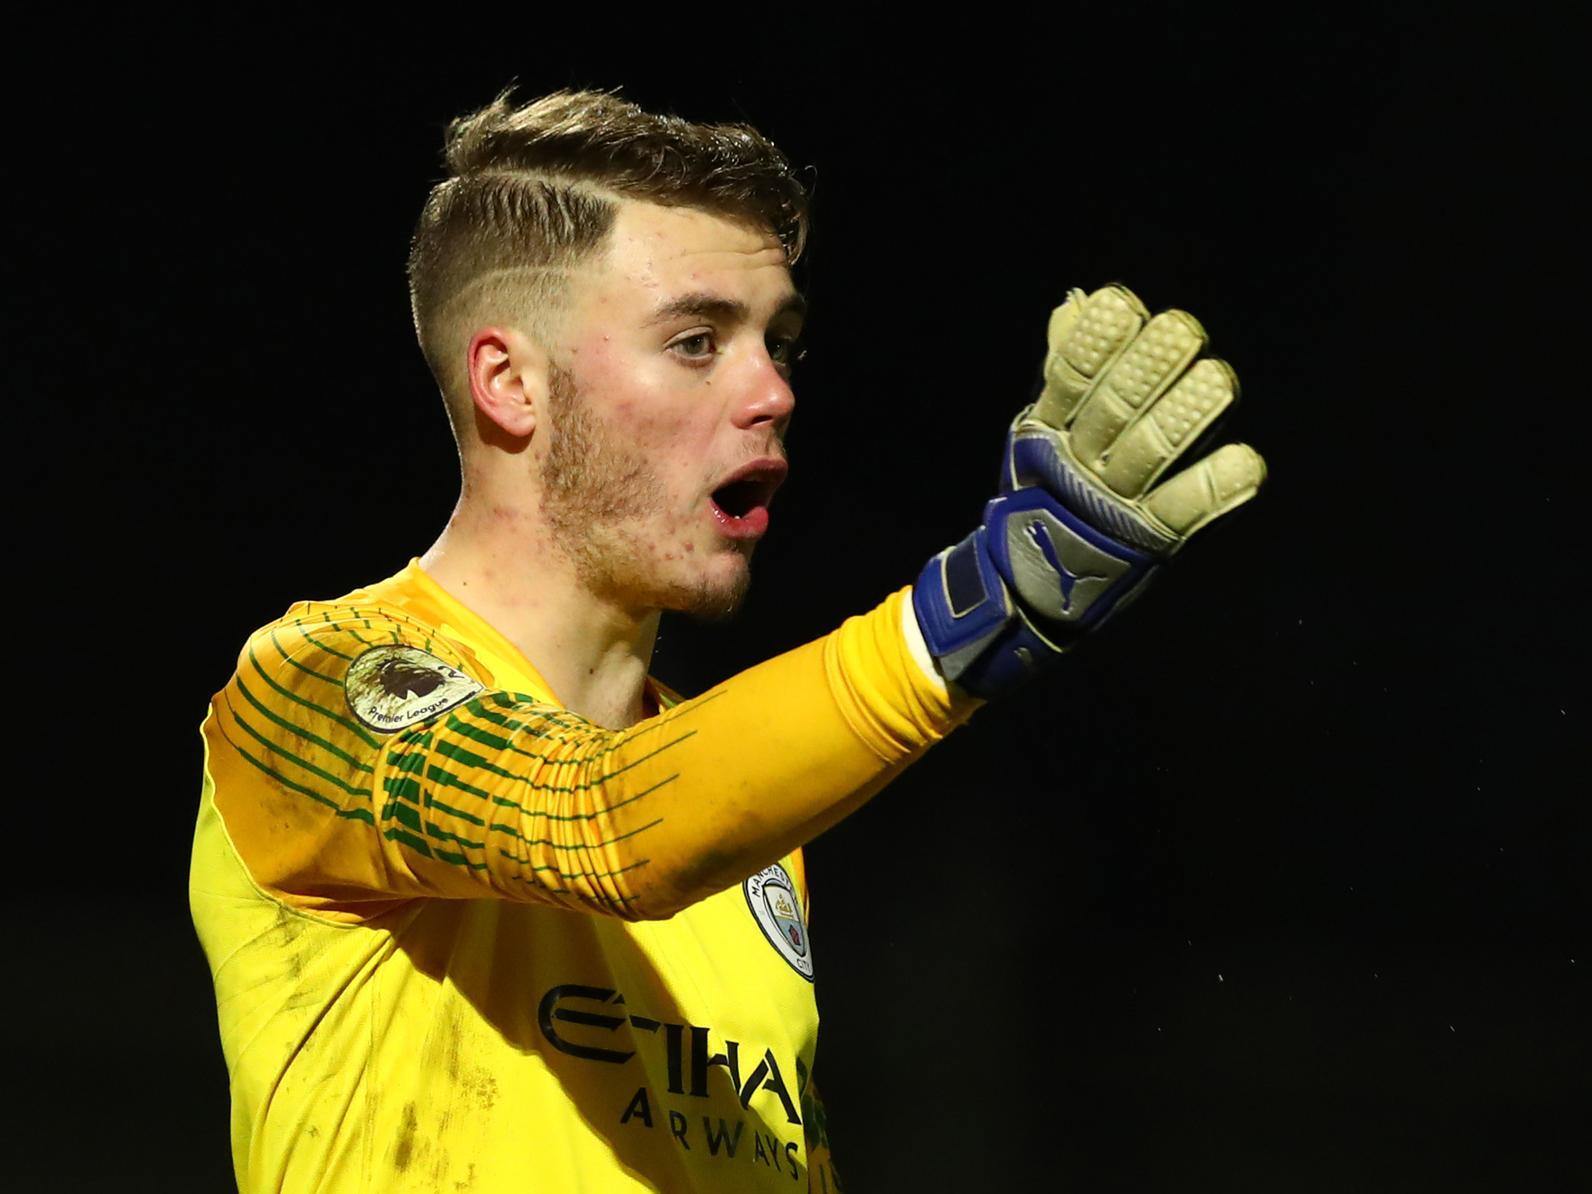 Charlton Athletic look like they could be set to sign former Manchester City goalkeeper Curtis Anderson, who is said to be training with the club's U21s ahead of a permanent deal being struck. (Football League World)